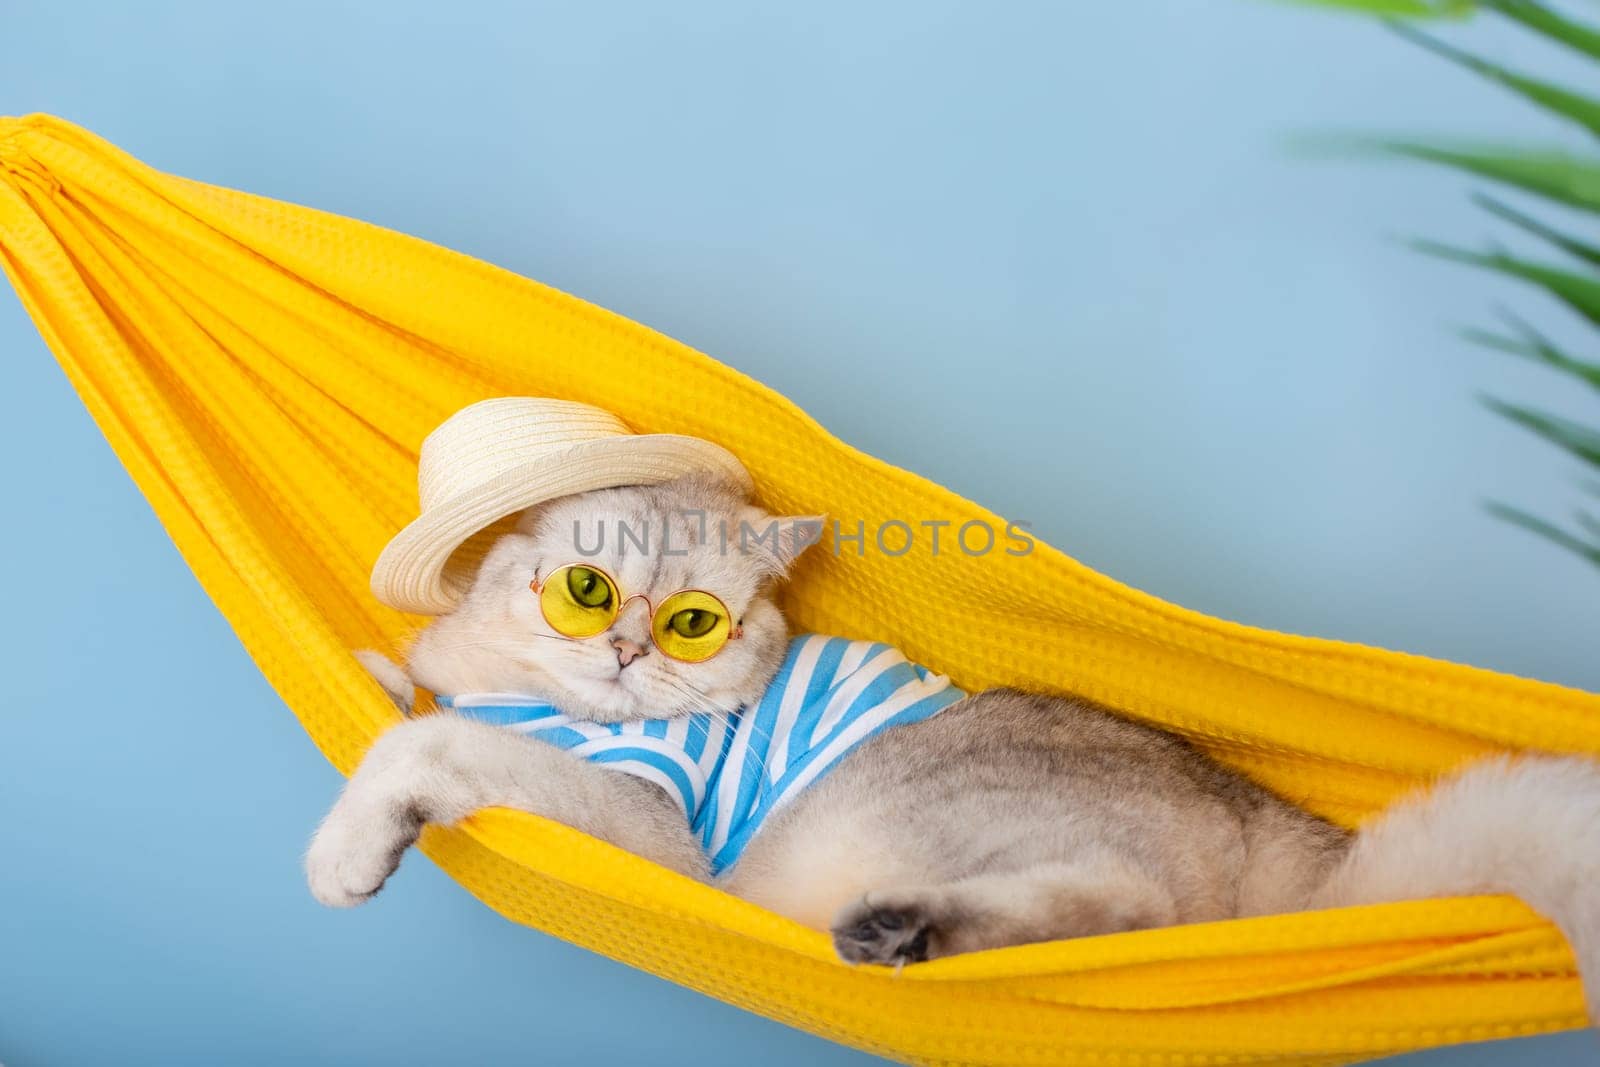 Funny white cat in a straw hat, yellow glasses and blue striped T-shirt resting in a yellow fabric hammock, on a blue background, with leaves of a palm tree. Close up. Copy space